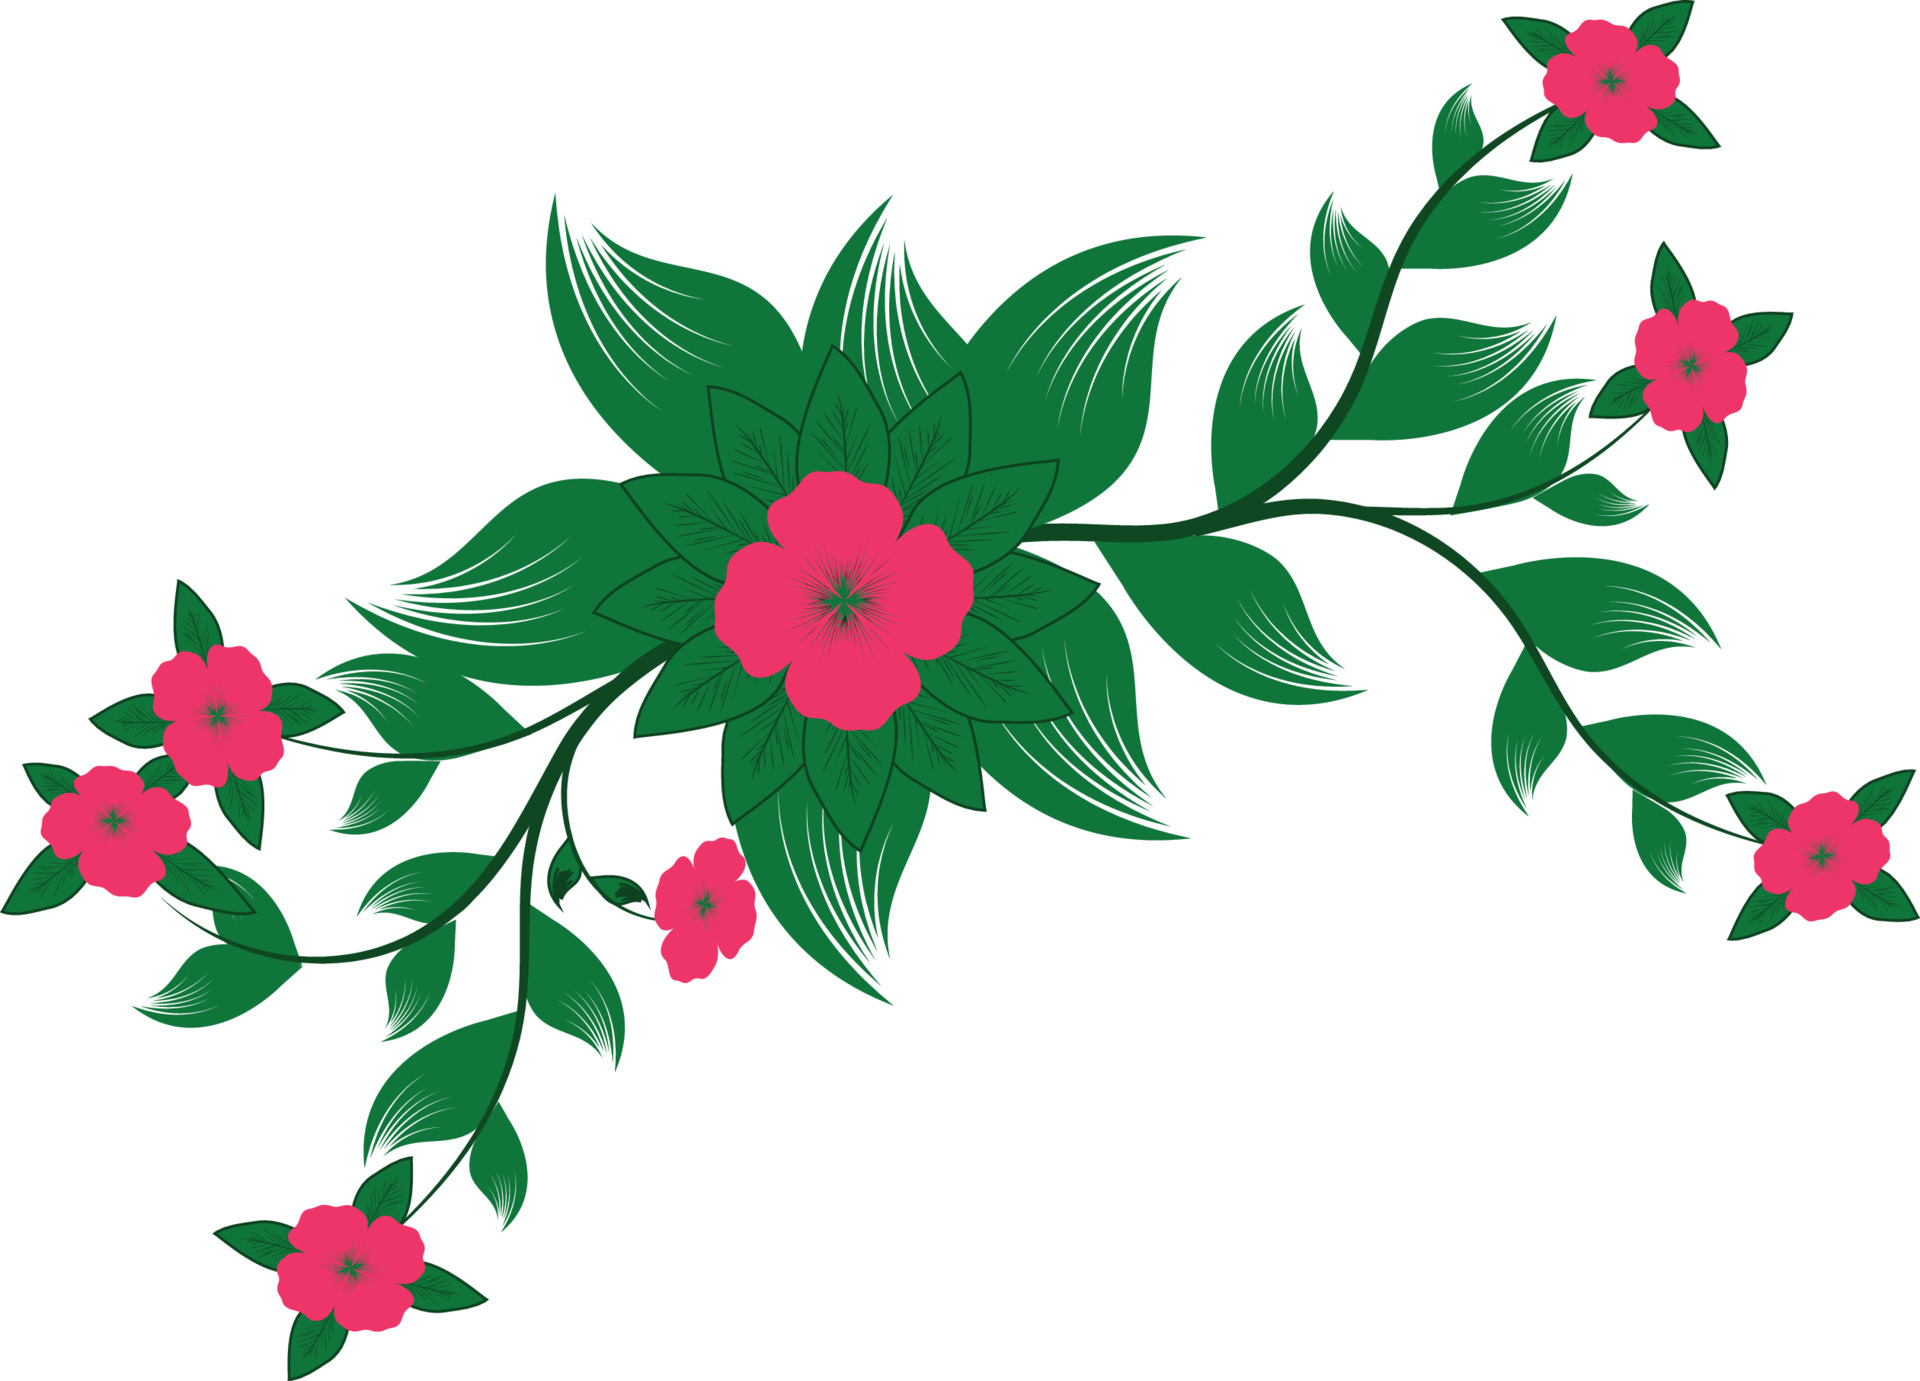 merry christmas flower with leaves and berries design, winter season ...